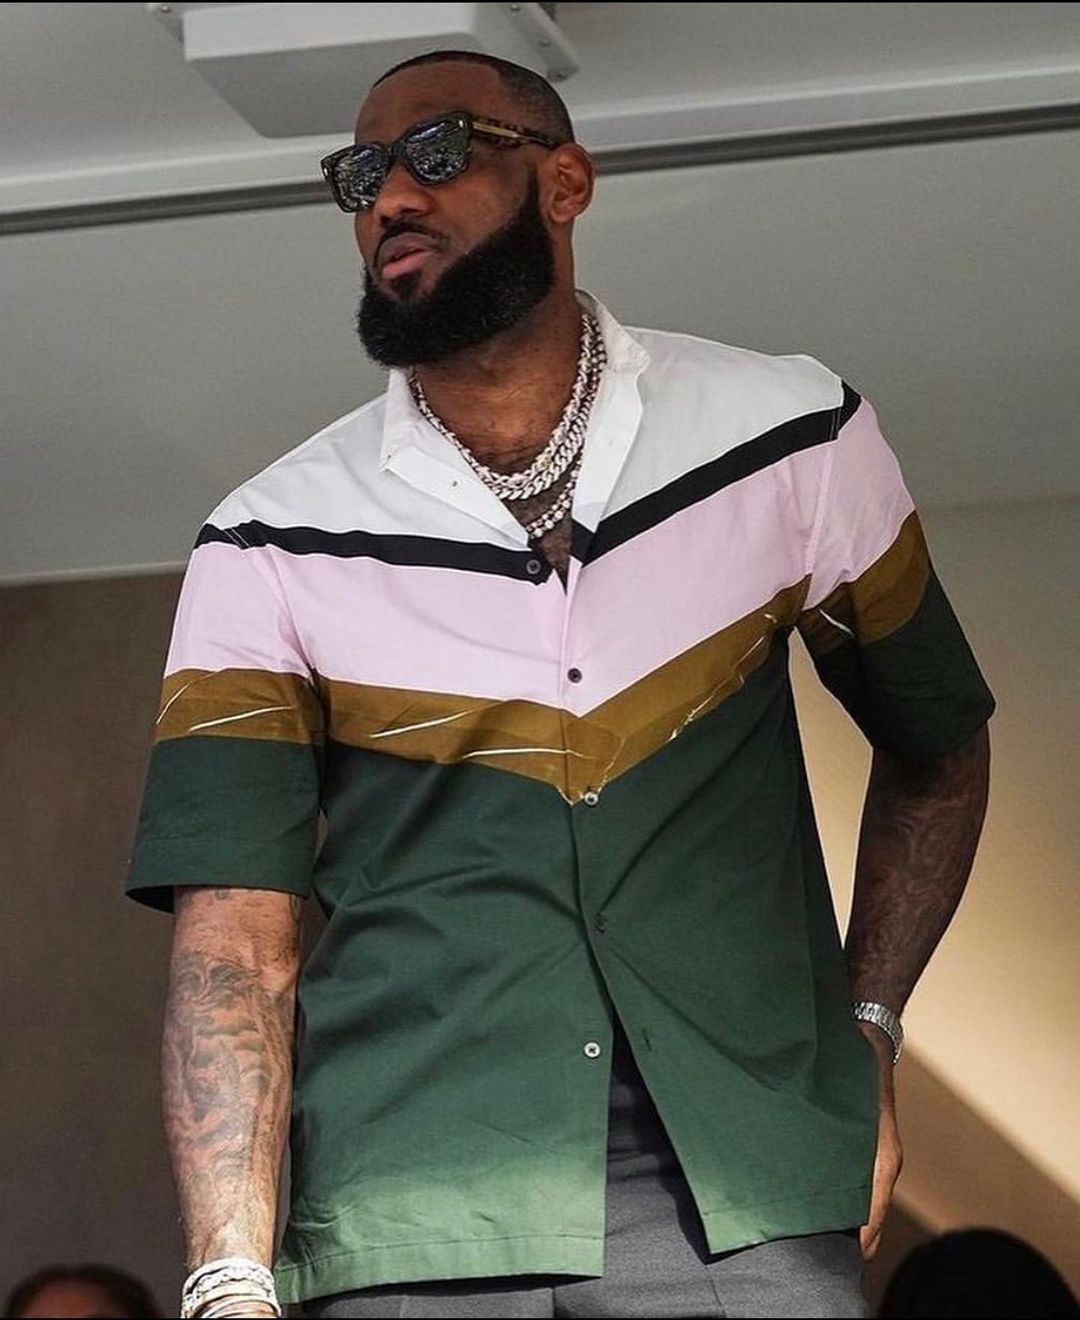 LeBron James used his social media on Sunday night (19) to respond to critics after an outstanding performance on the court. (Photo:Instagram)